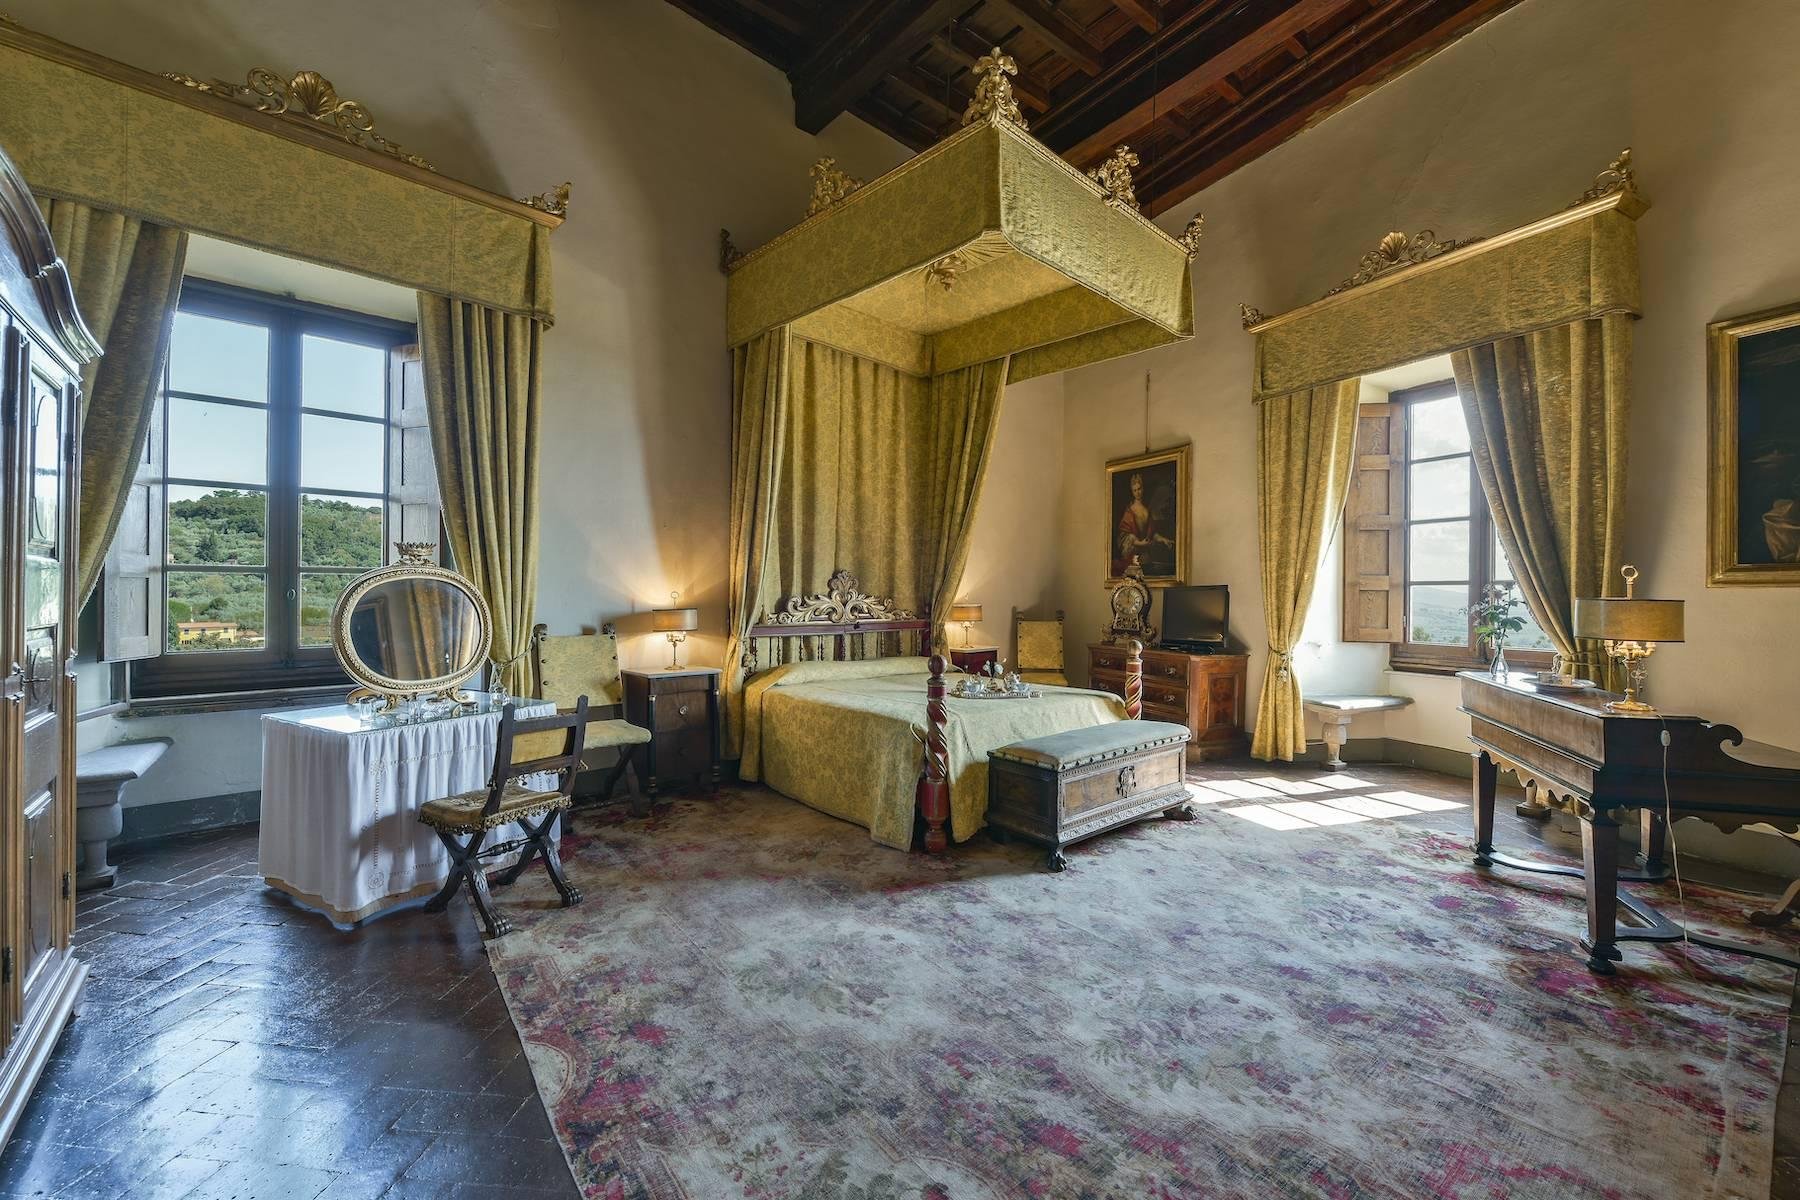 Francis York  Tuscan Villa Owned by Italian Aristocracy Available to Book as a Luxury Villa Rental 5.jpg